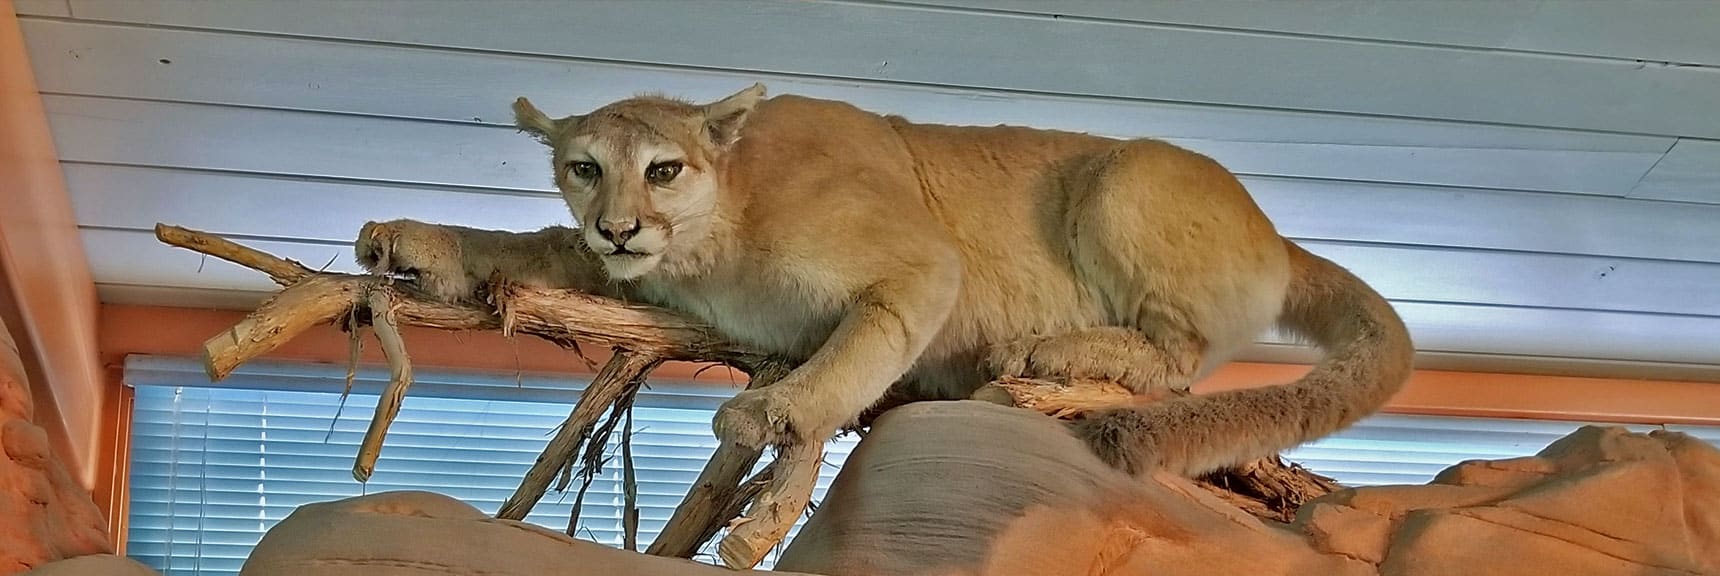 Far More Shy, Mountain Lions are Seldom Seen in Valley of Fire State Park | Visitor Center | Valley of Fire State Park, Nevada